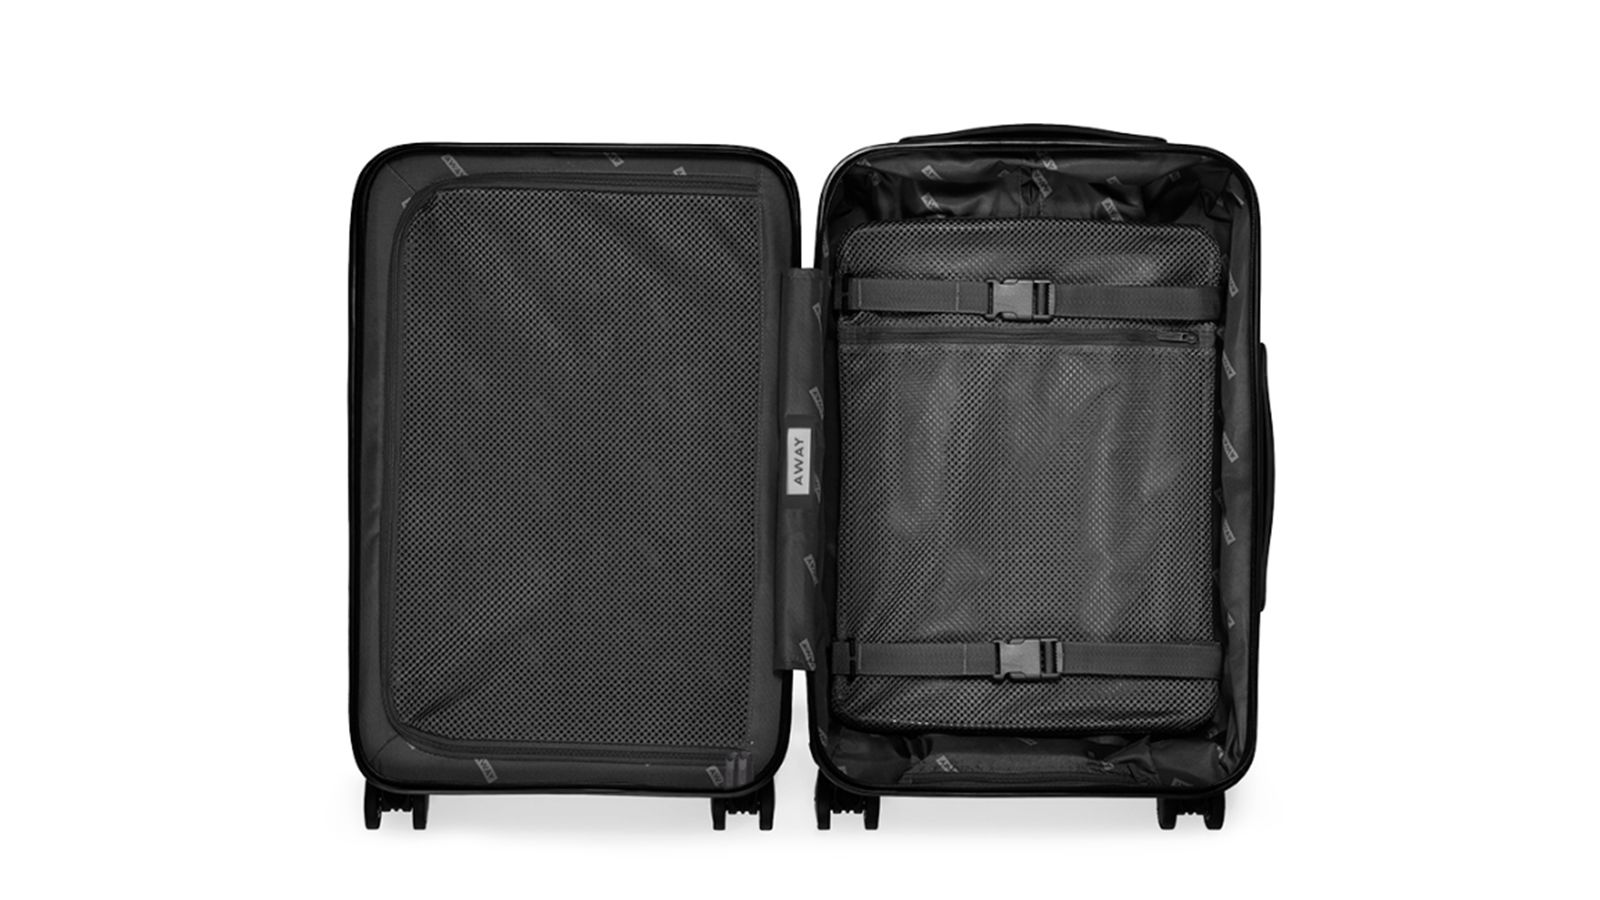 RCS Review: Away Luggage Carry On